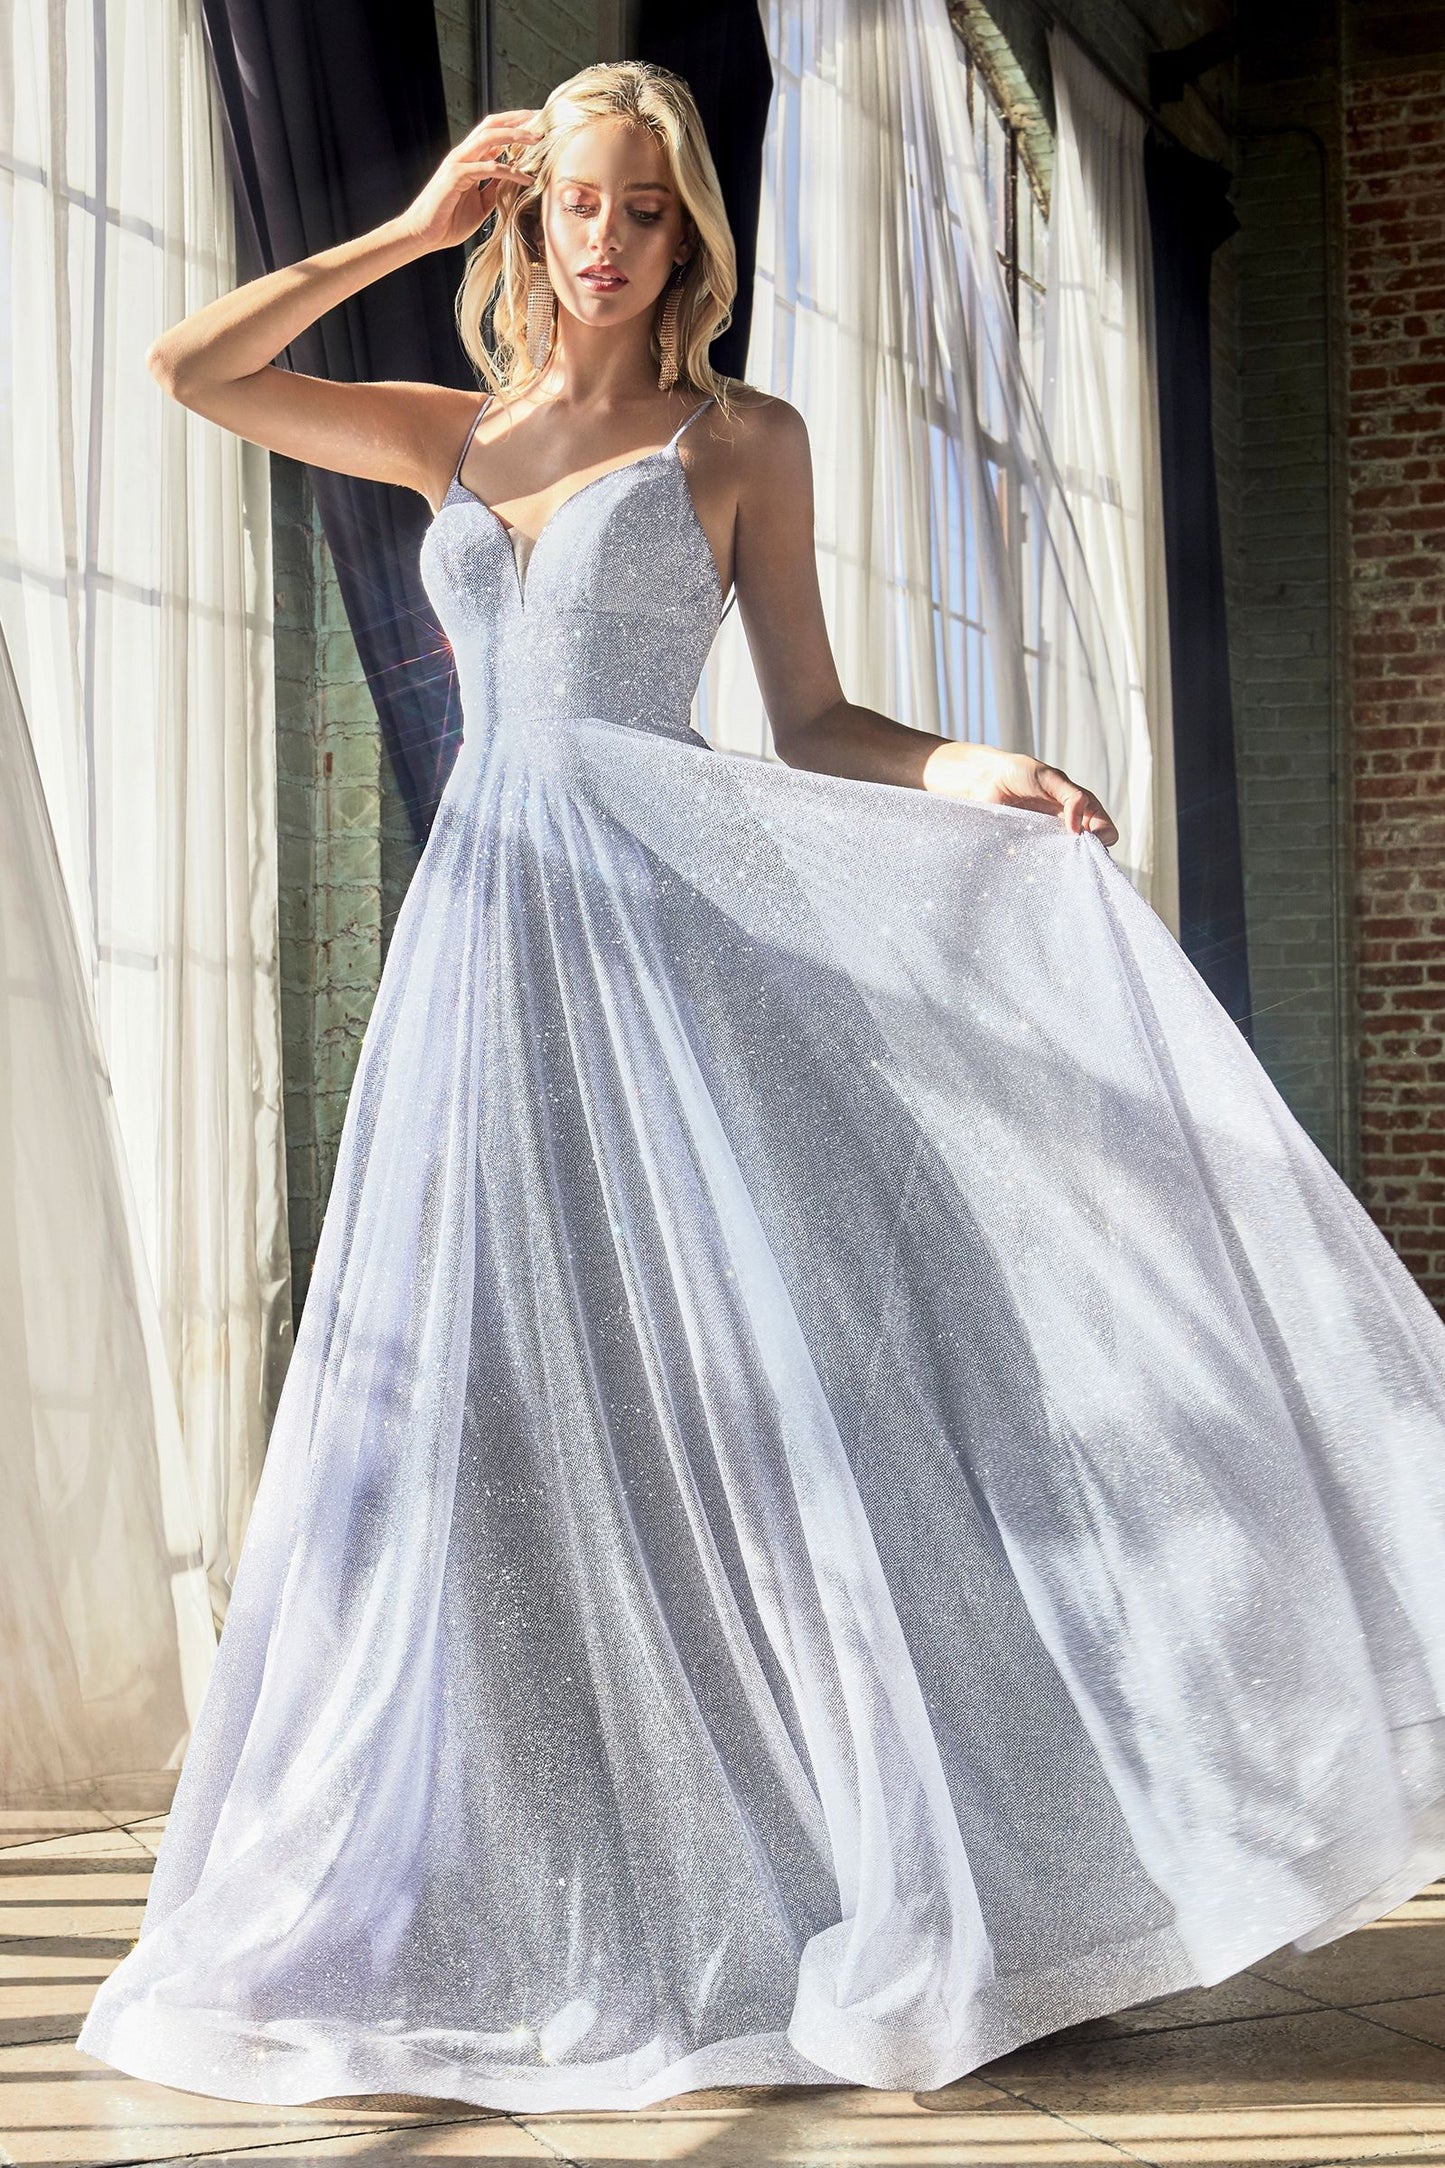 Sparkling glitter light blue dress with a deep sweetheart neckline and thin straps.